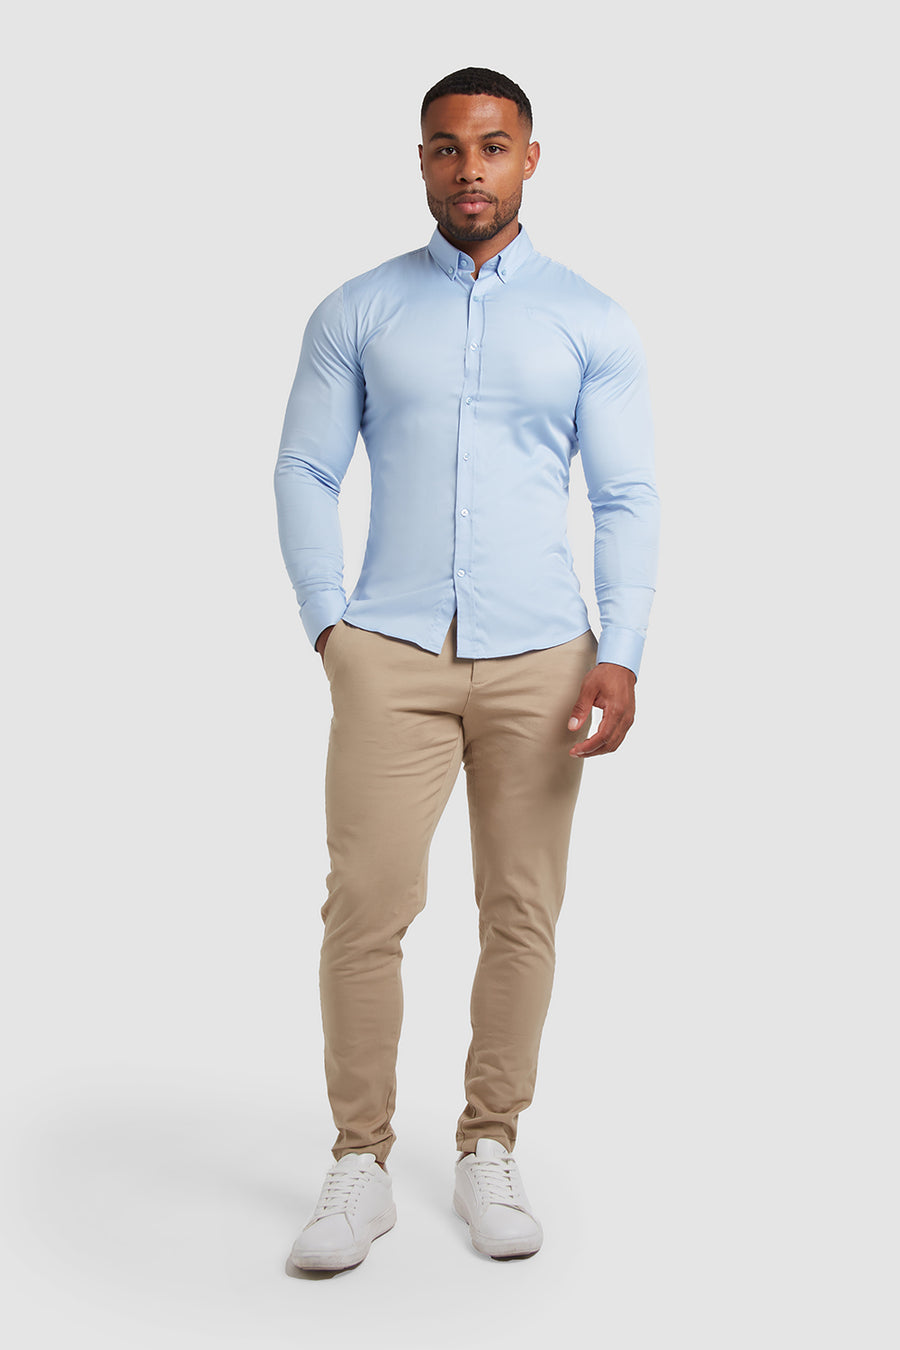 Muscle Fit Signature Shirt 2.0 in Blue - TAILORED ATHLETE - USA